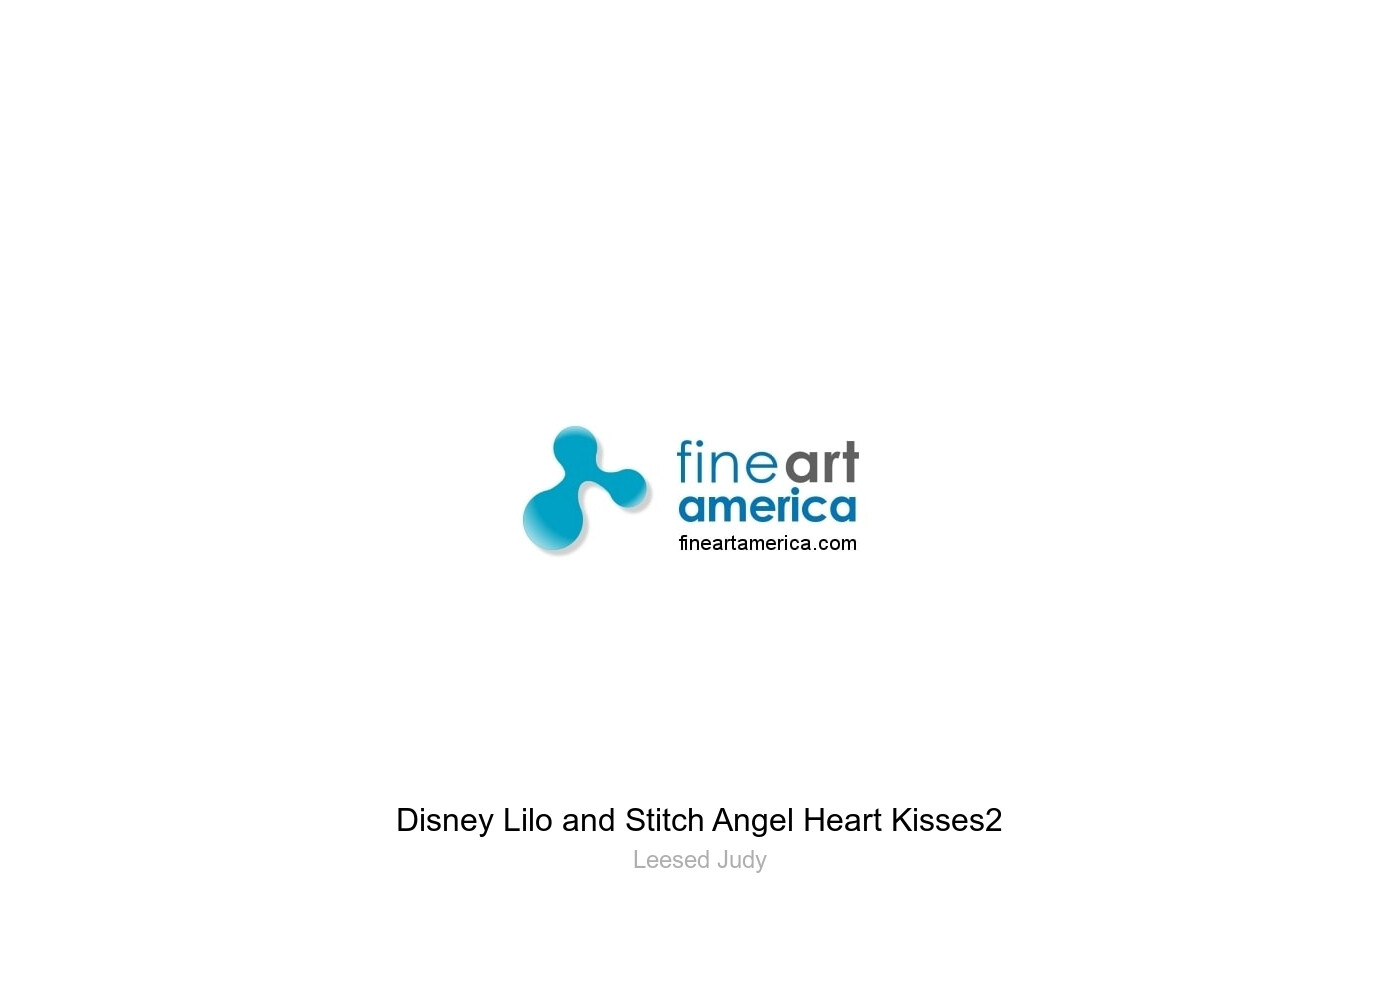 Disney Lilo and Stitch Angel Heart Kisses1 by Leesed Judy